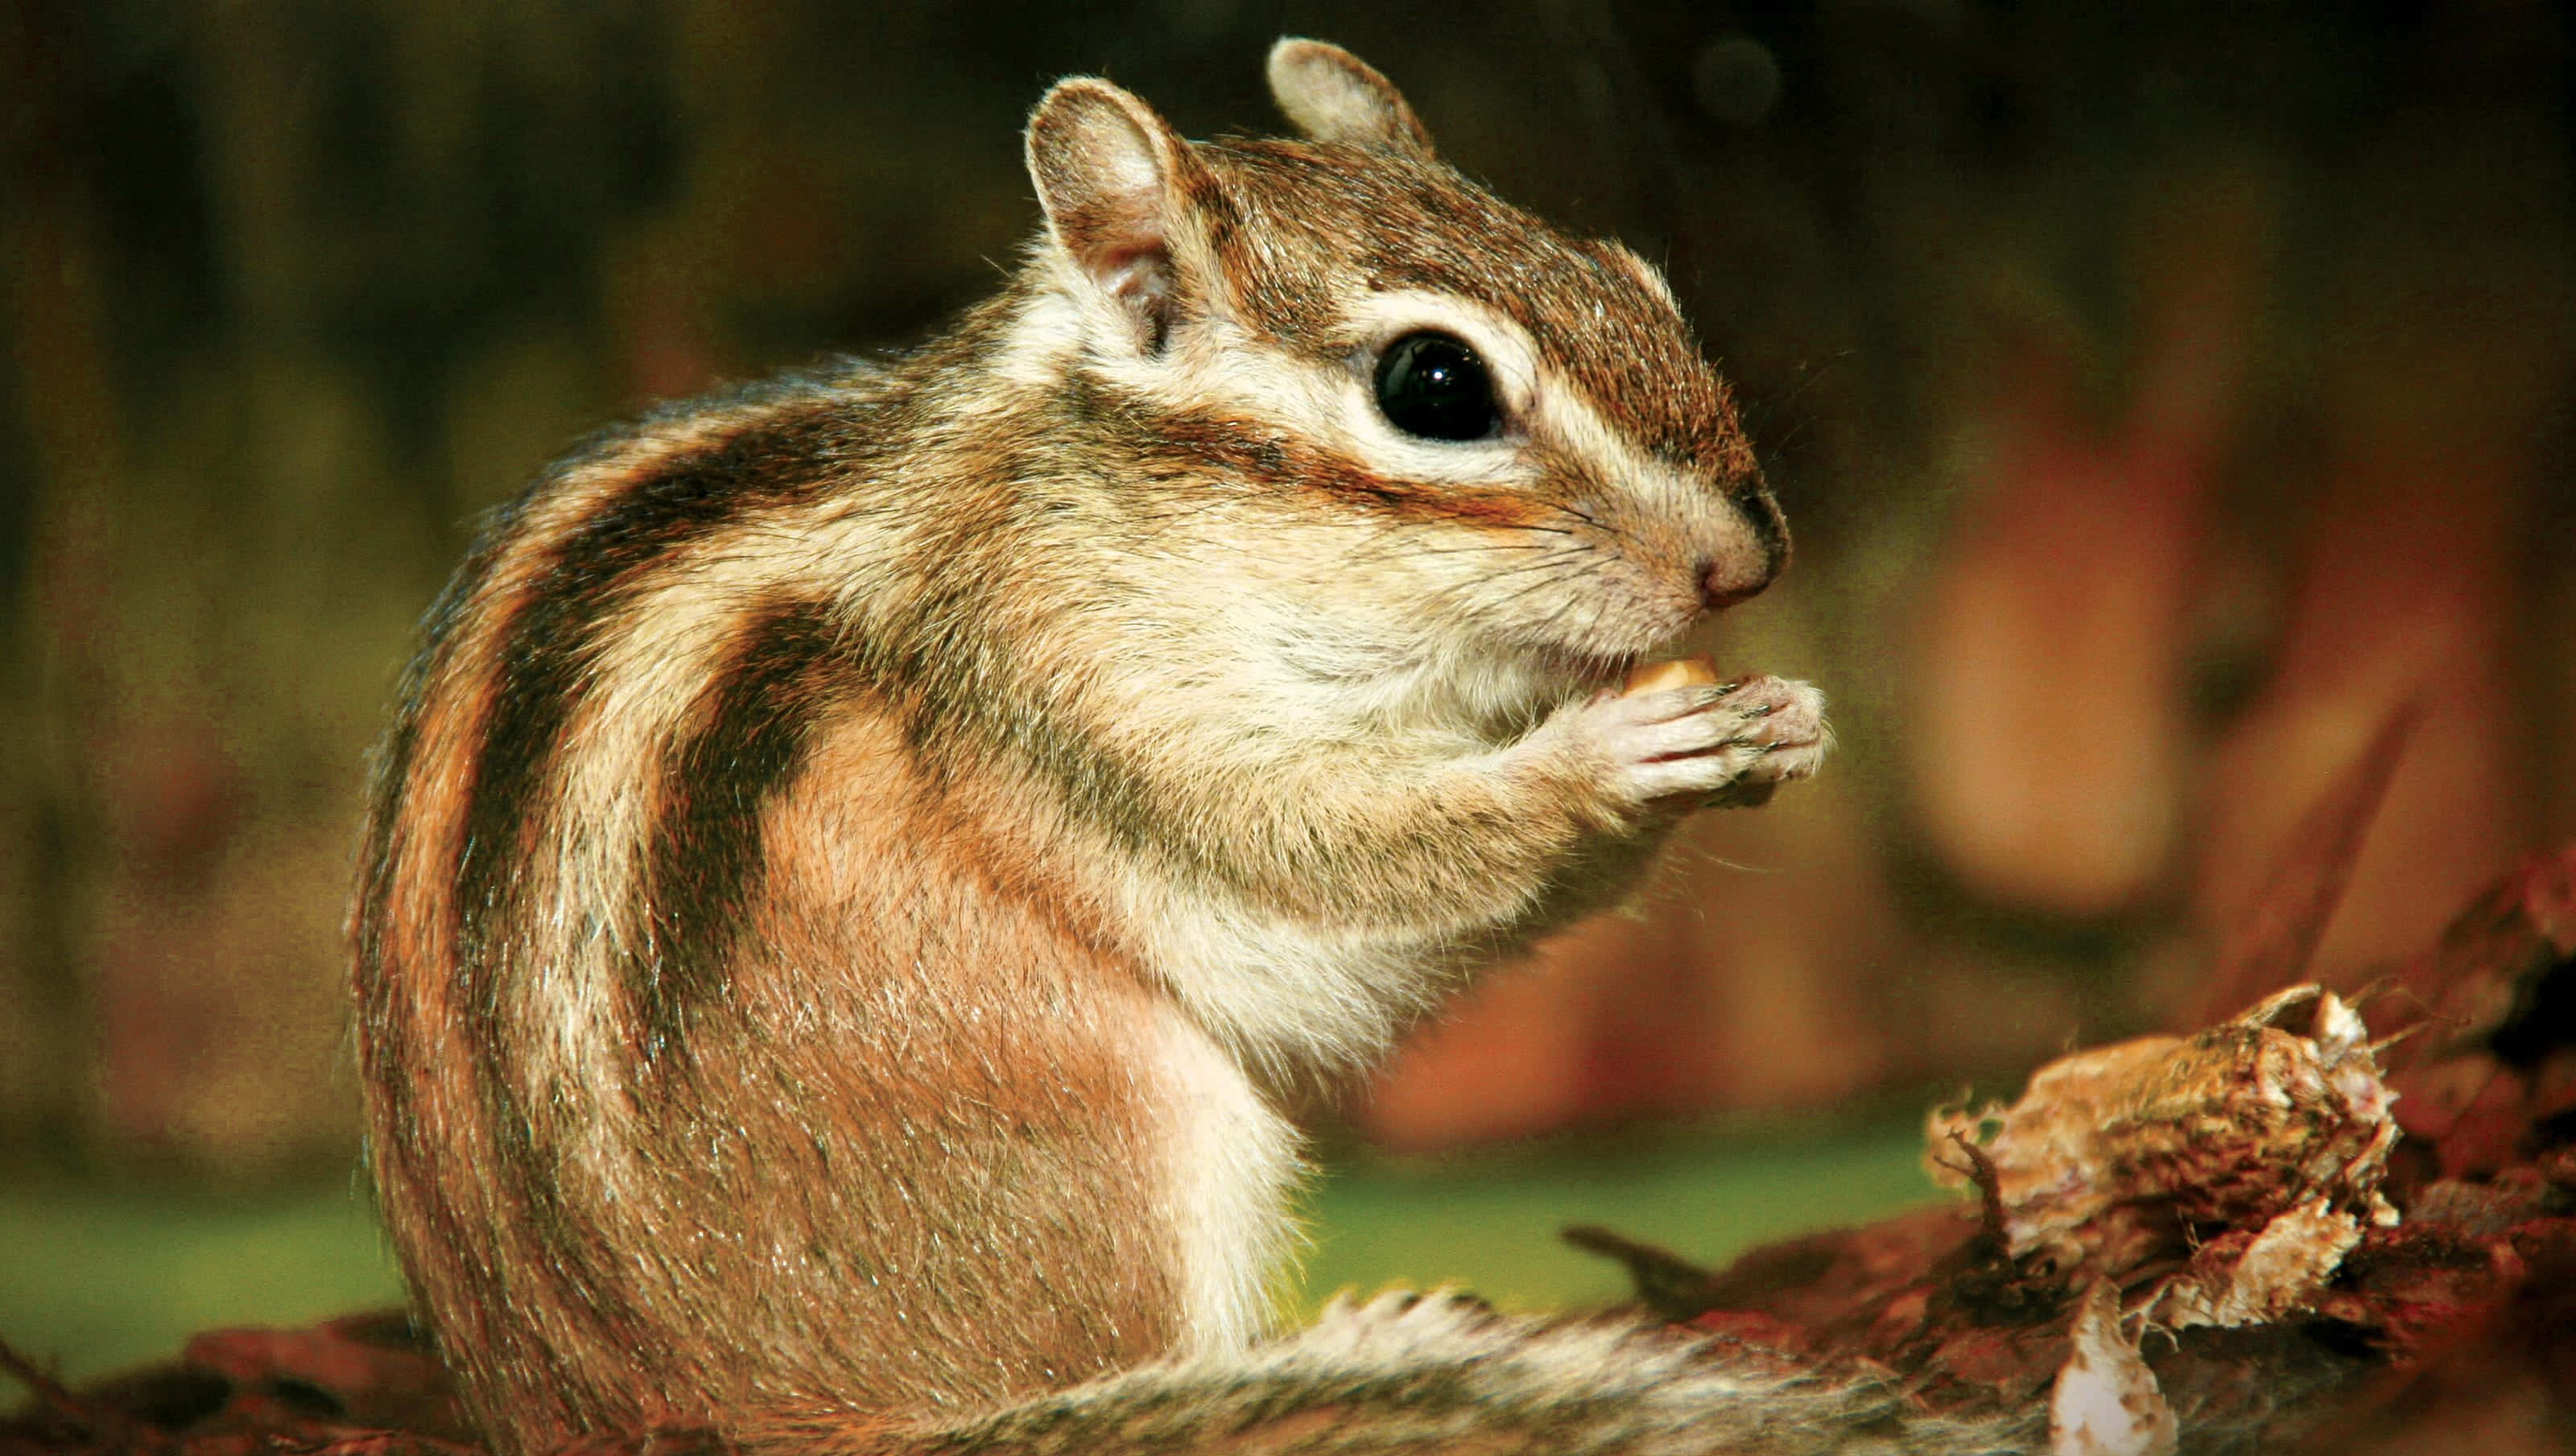 Description– This image features an adorable chipmunk perched atop a beautiful tree branch, ready to enjoy a delicious nut.